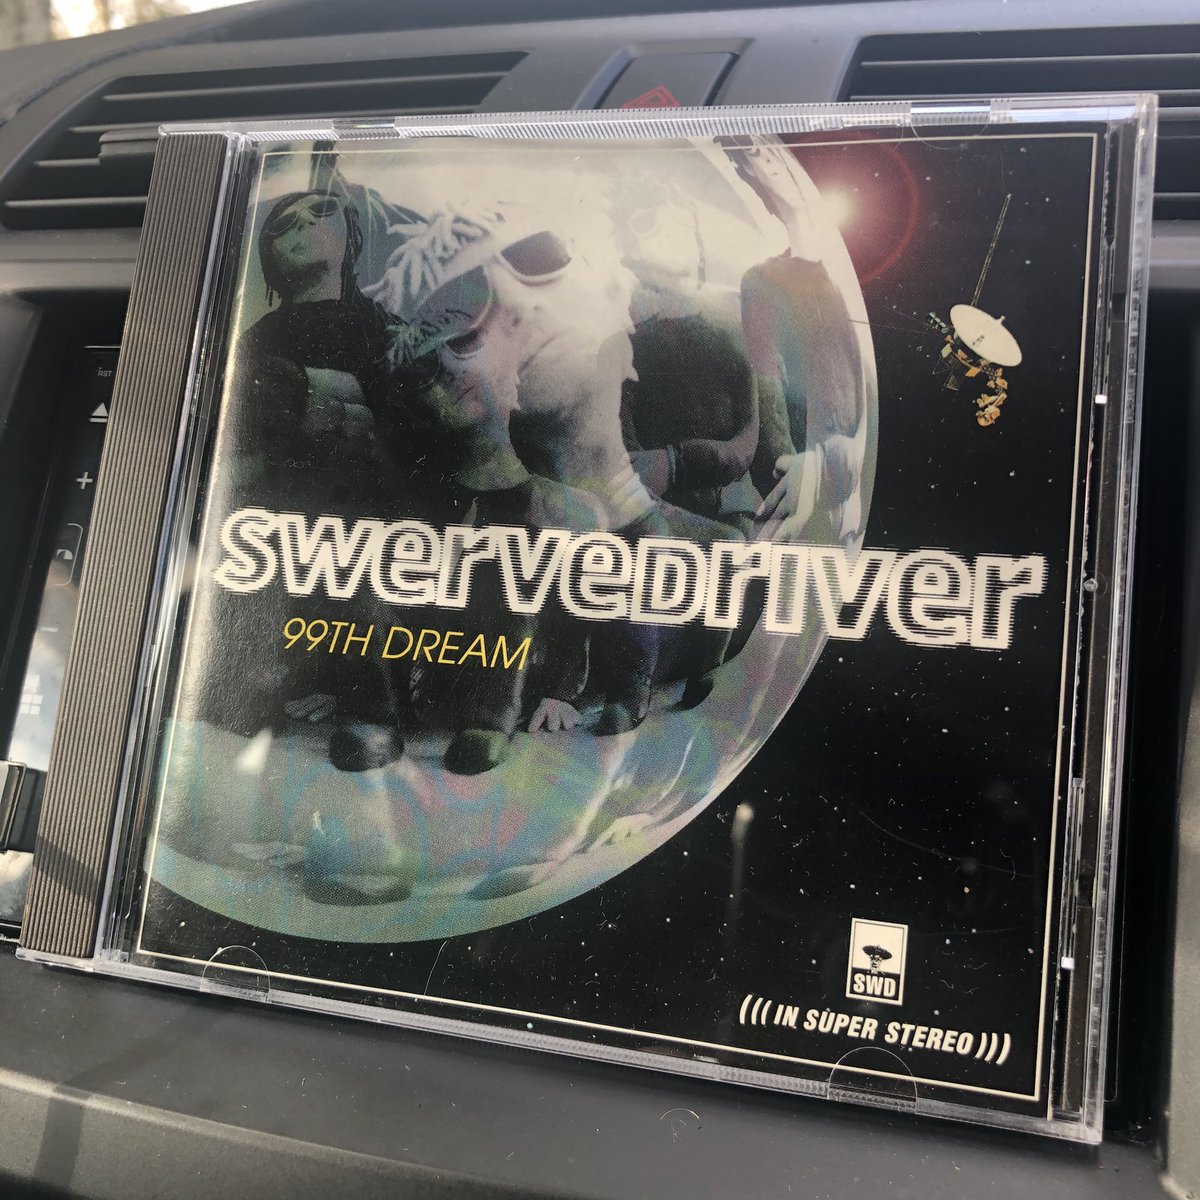 Listening to Swervedriver - 99th Dream on the way to work this morning @swervedriver